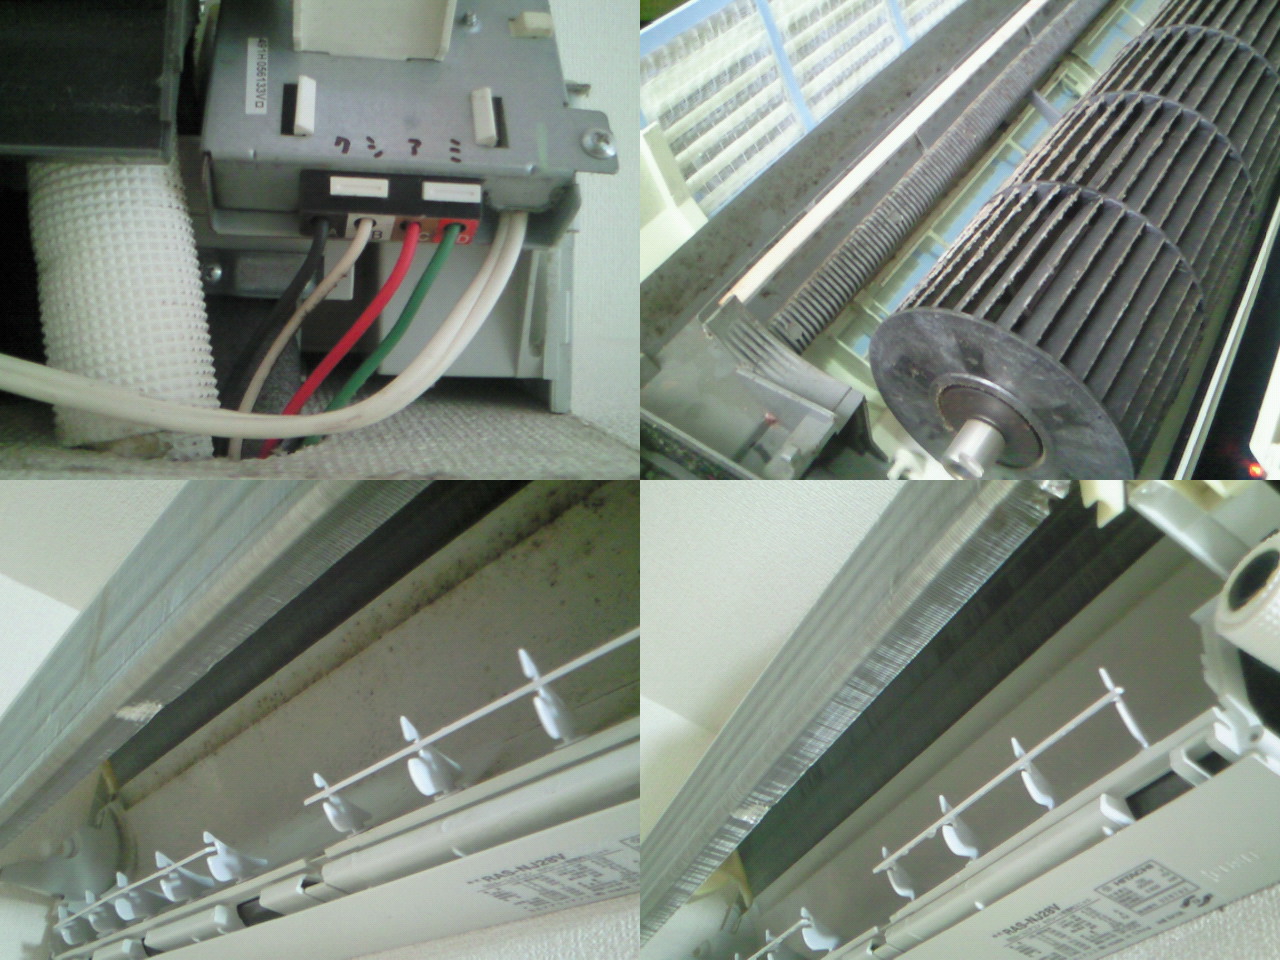 http://ajras.net/images/120720-aircon3.jpg